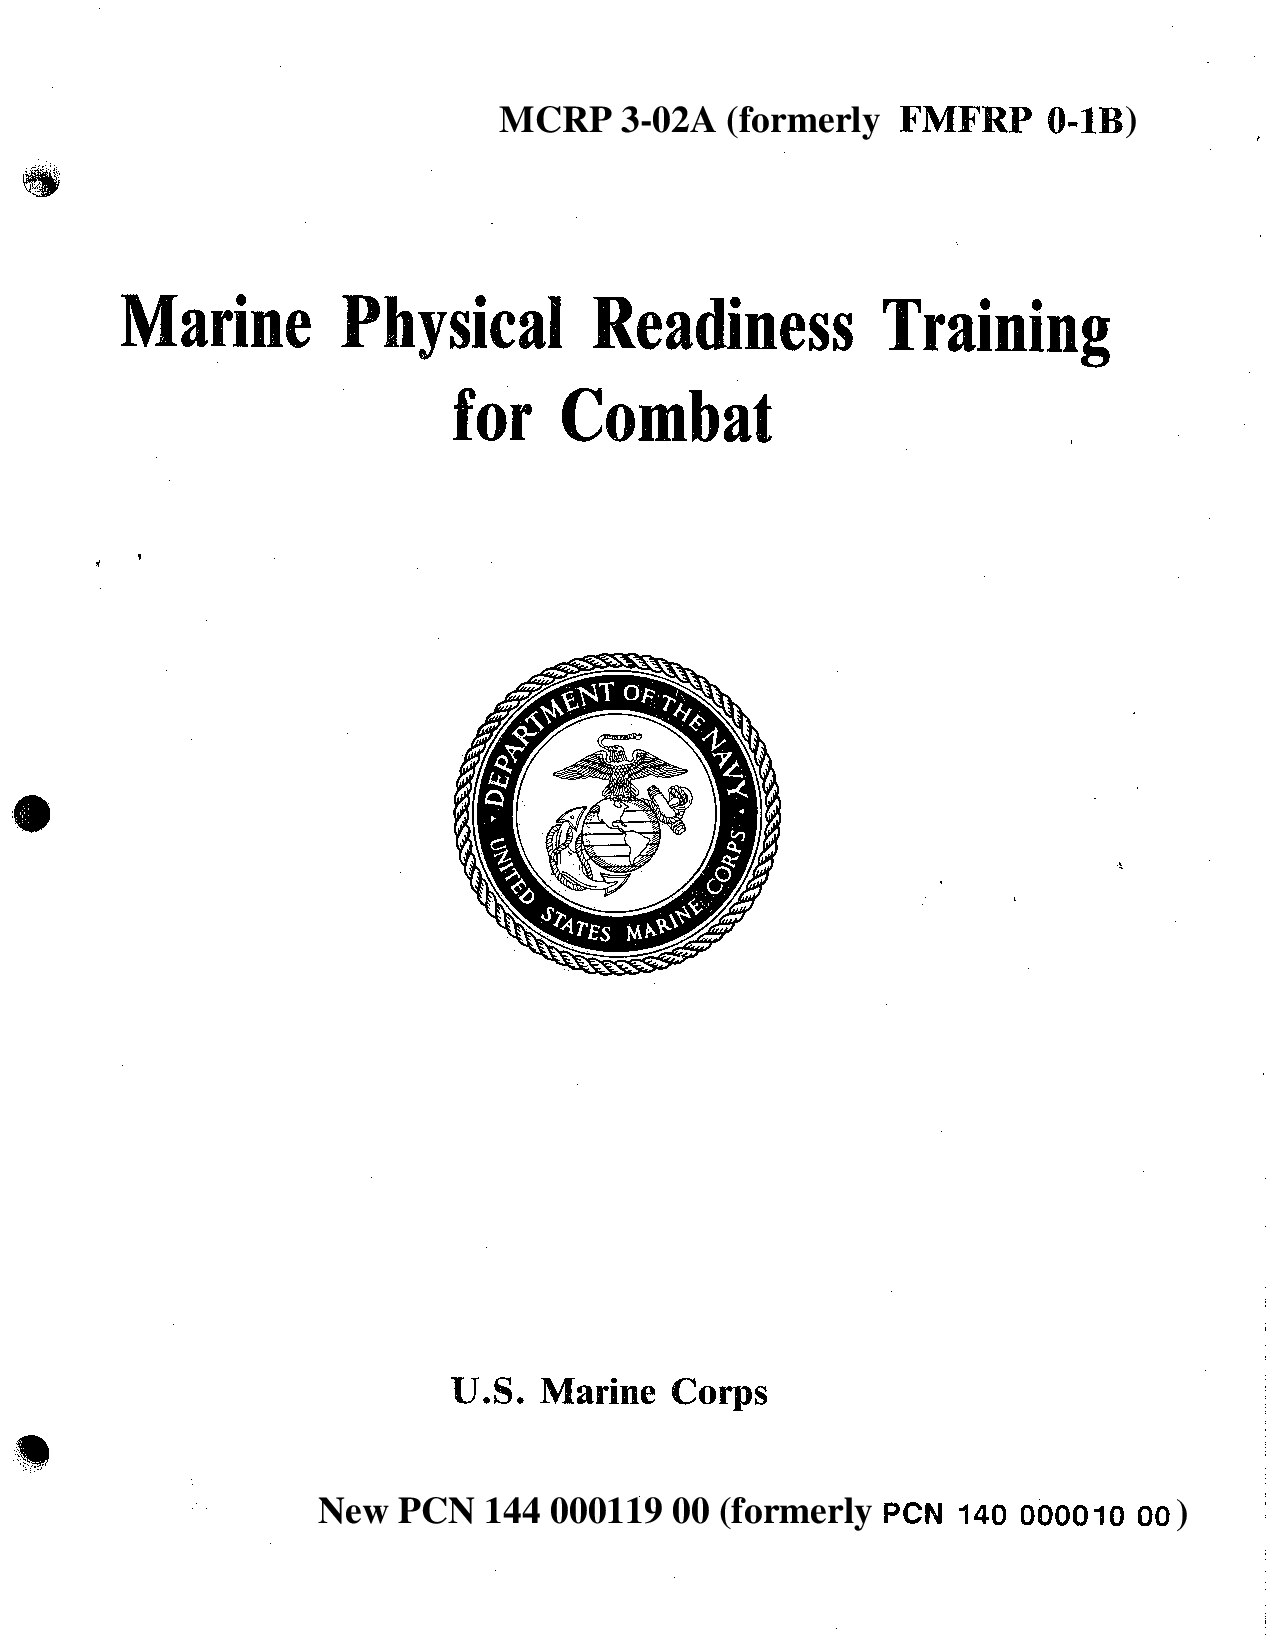 MCRP 3-02A Marine Physical Readiness Training for Combat